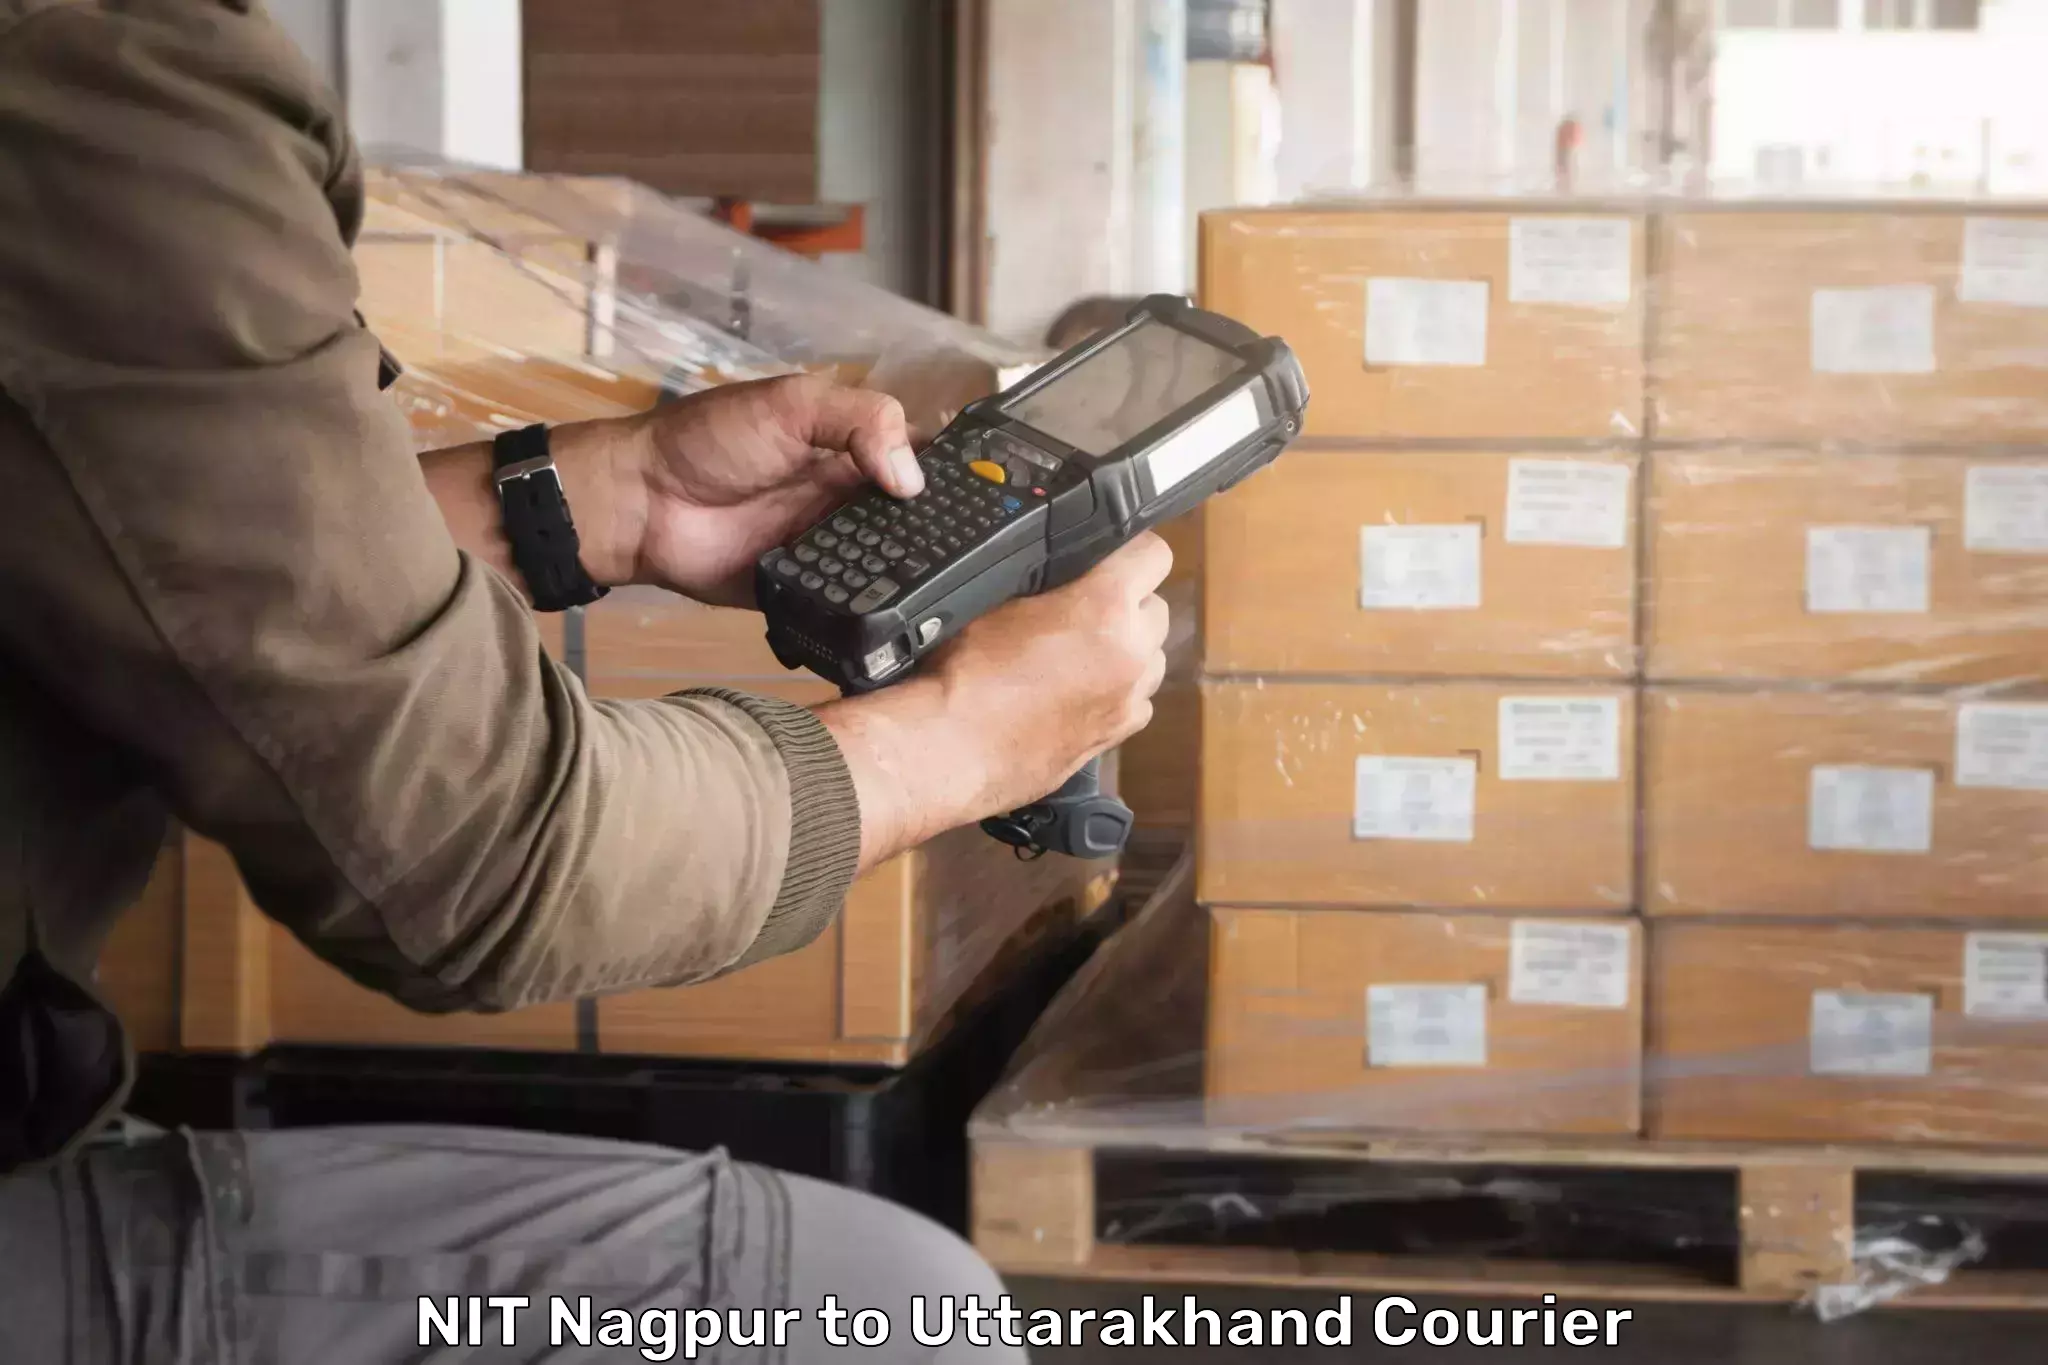 Express delivery solutions NIT Nagpur to Uttarakhand